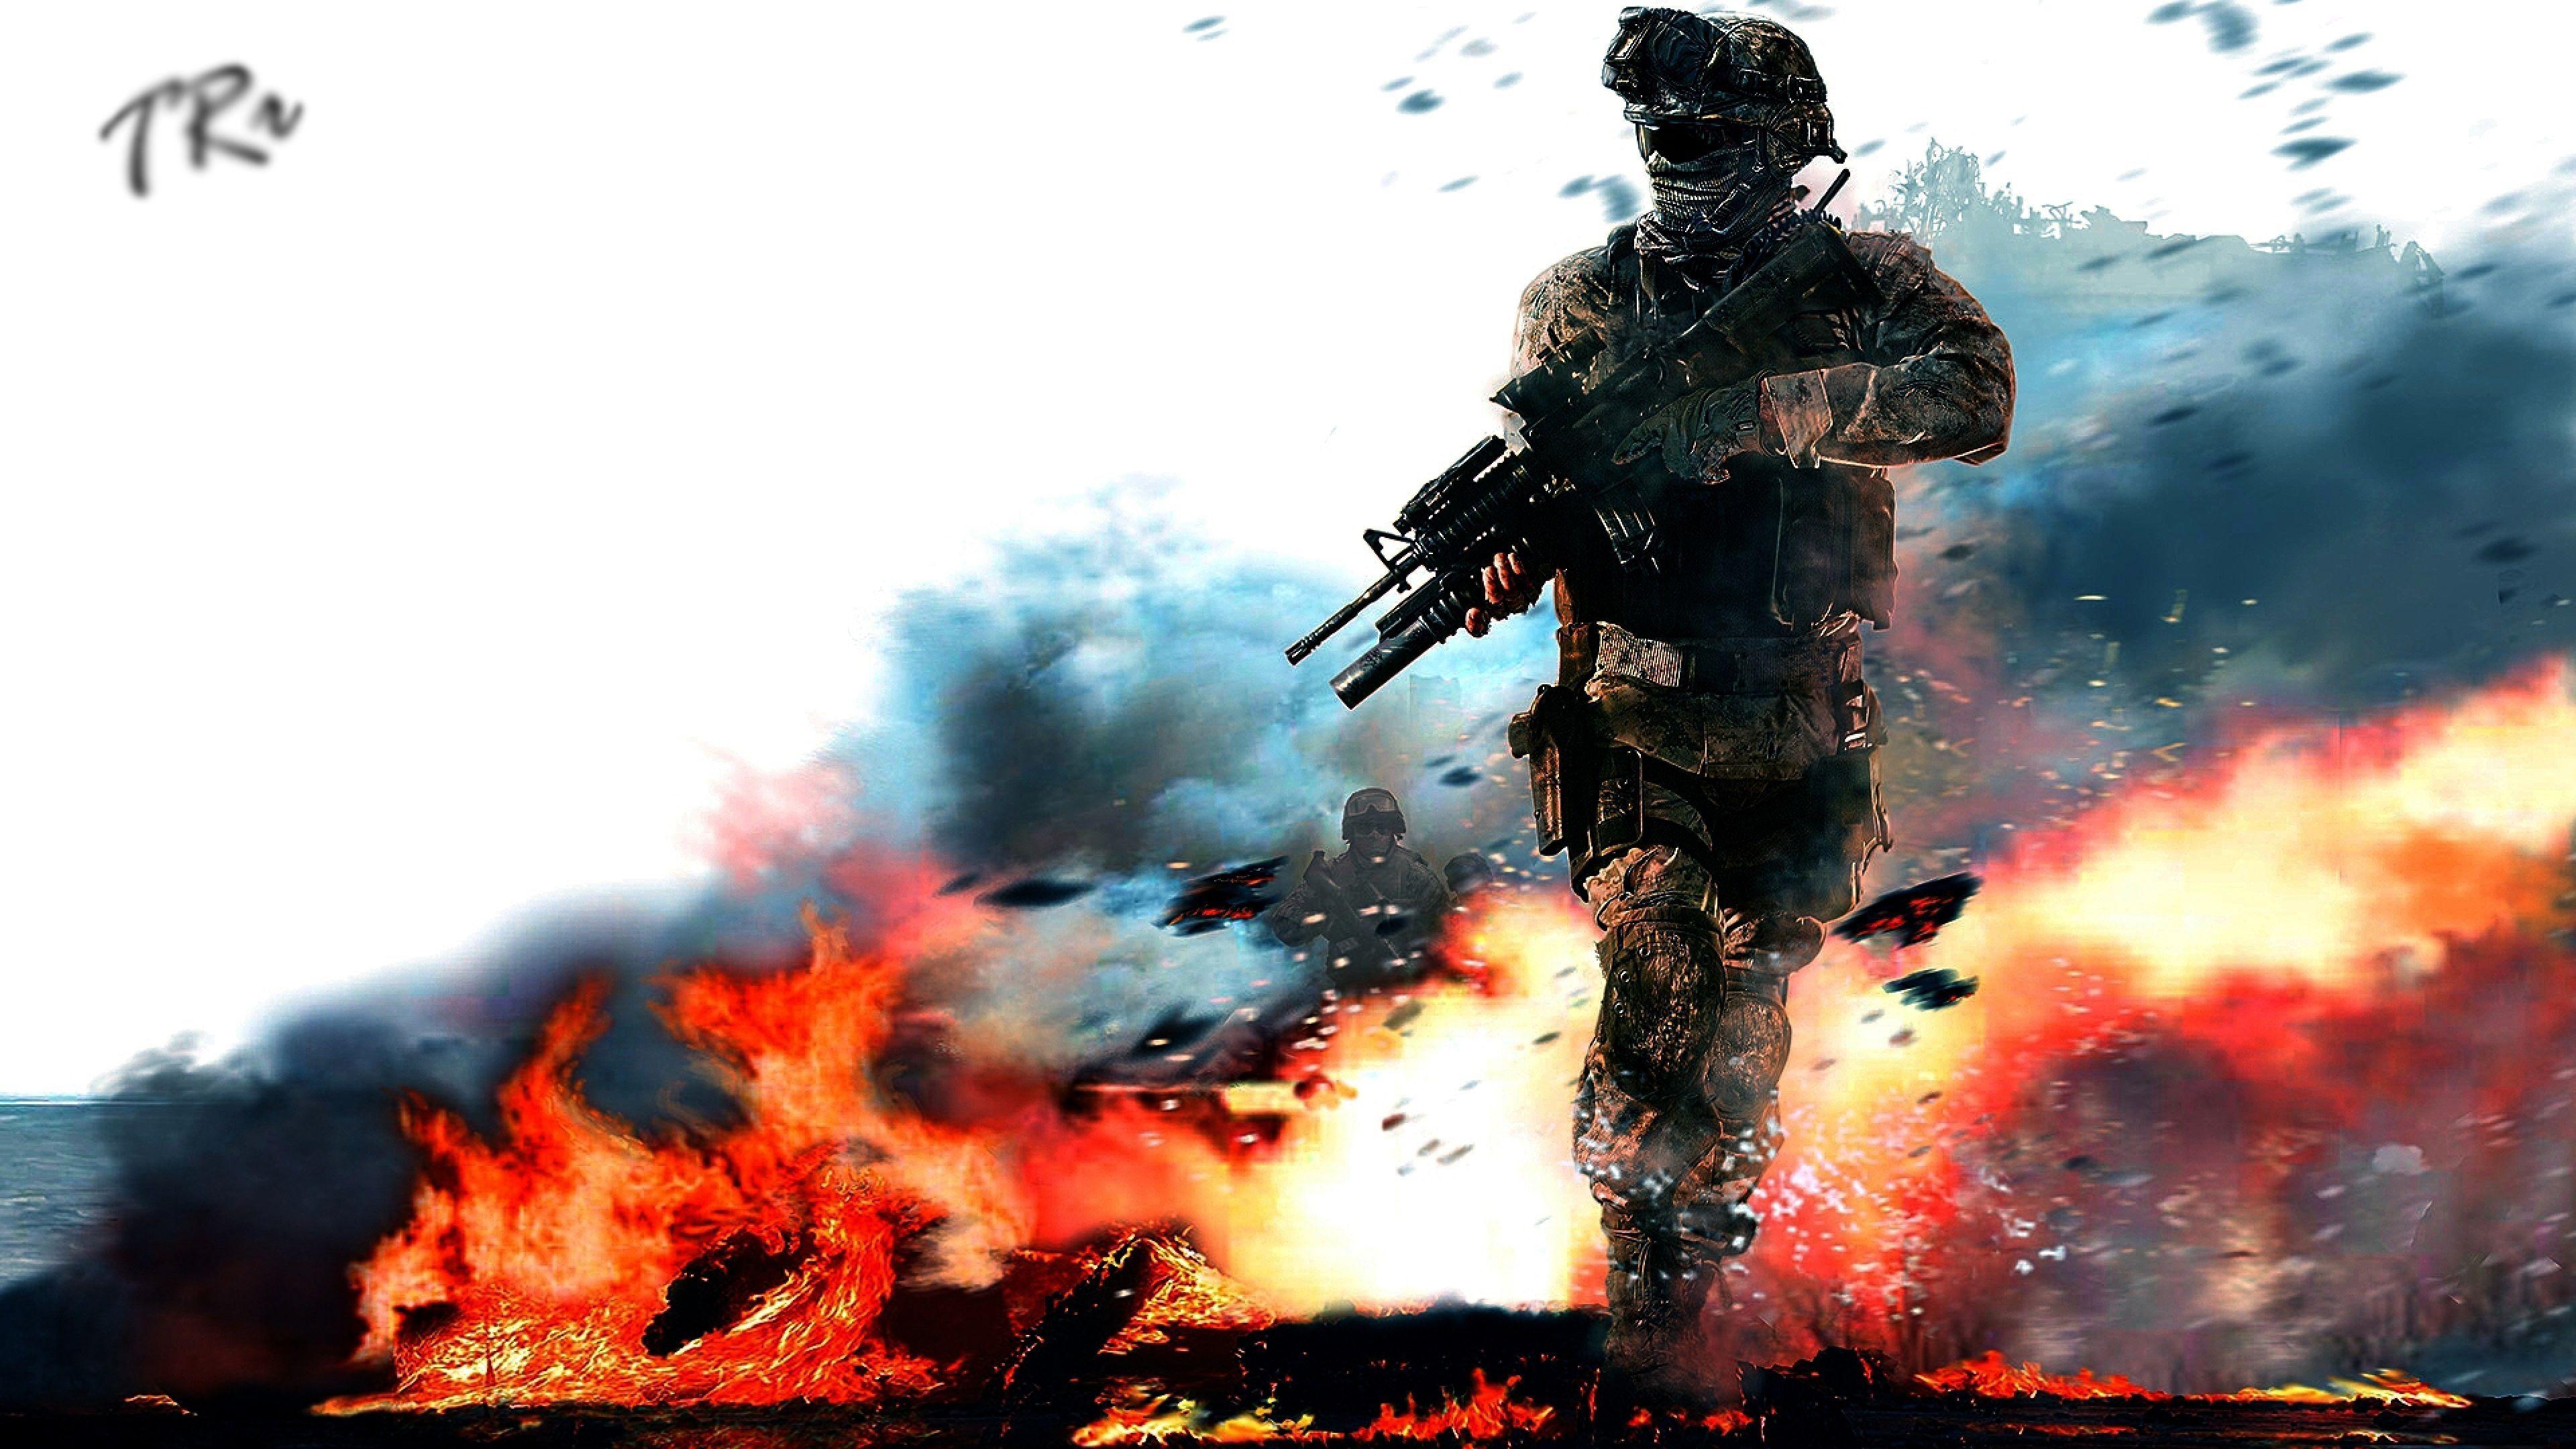 Top 25 Call of Duty (COD) Wallpapers every gamers should check out